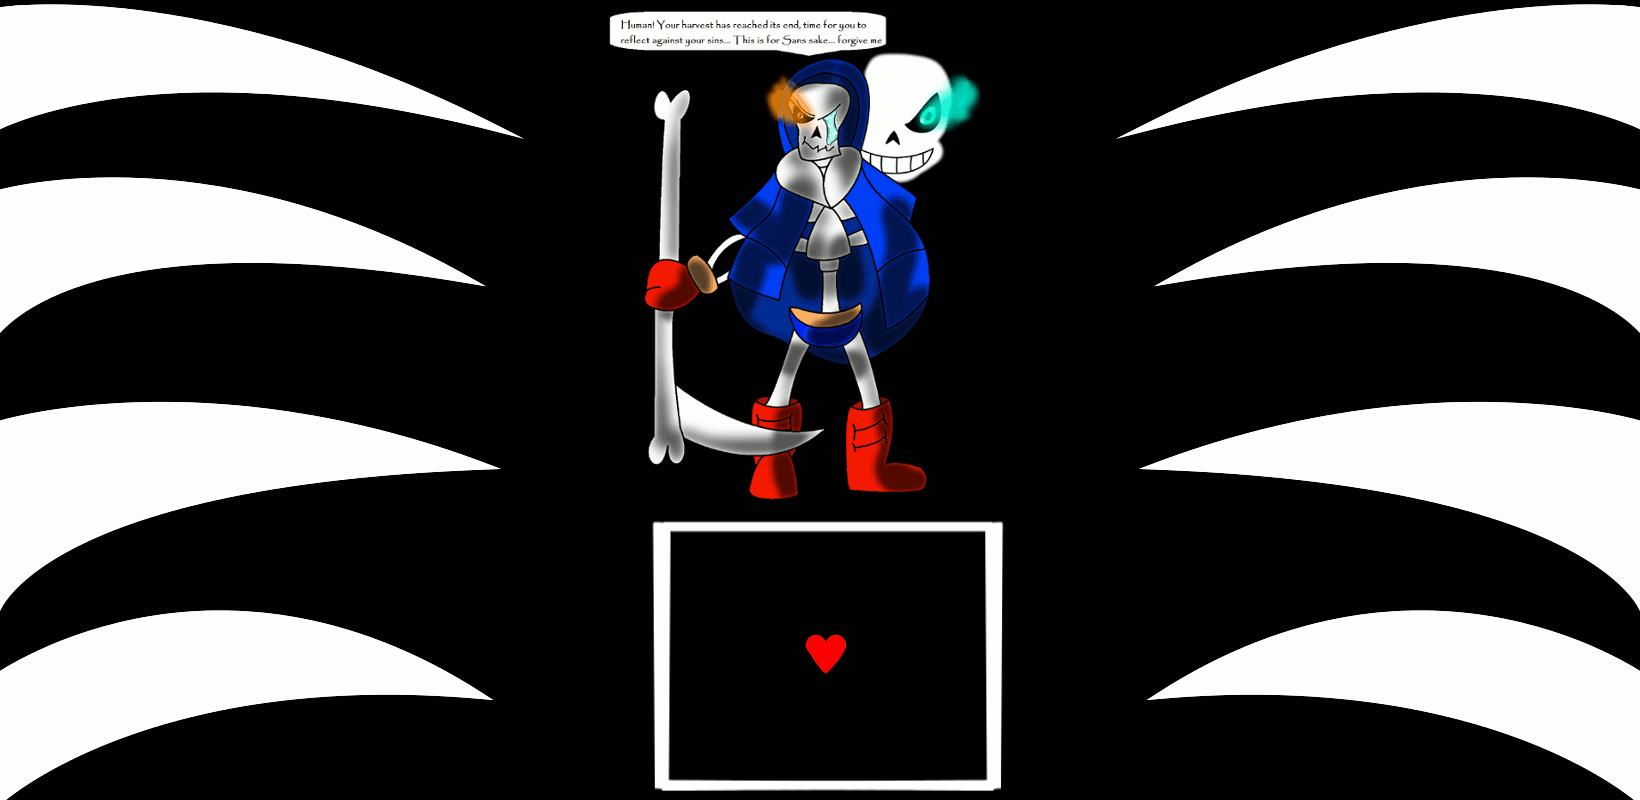 Undertale Papyrus Genocide Final Battle By Selthequeenseaia On